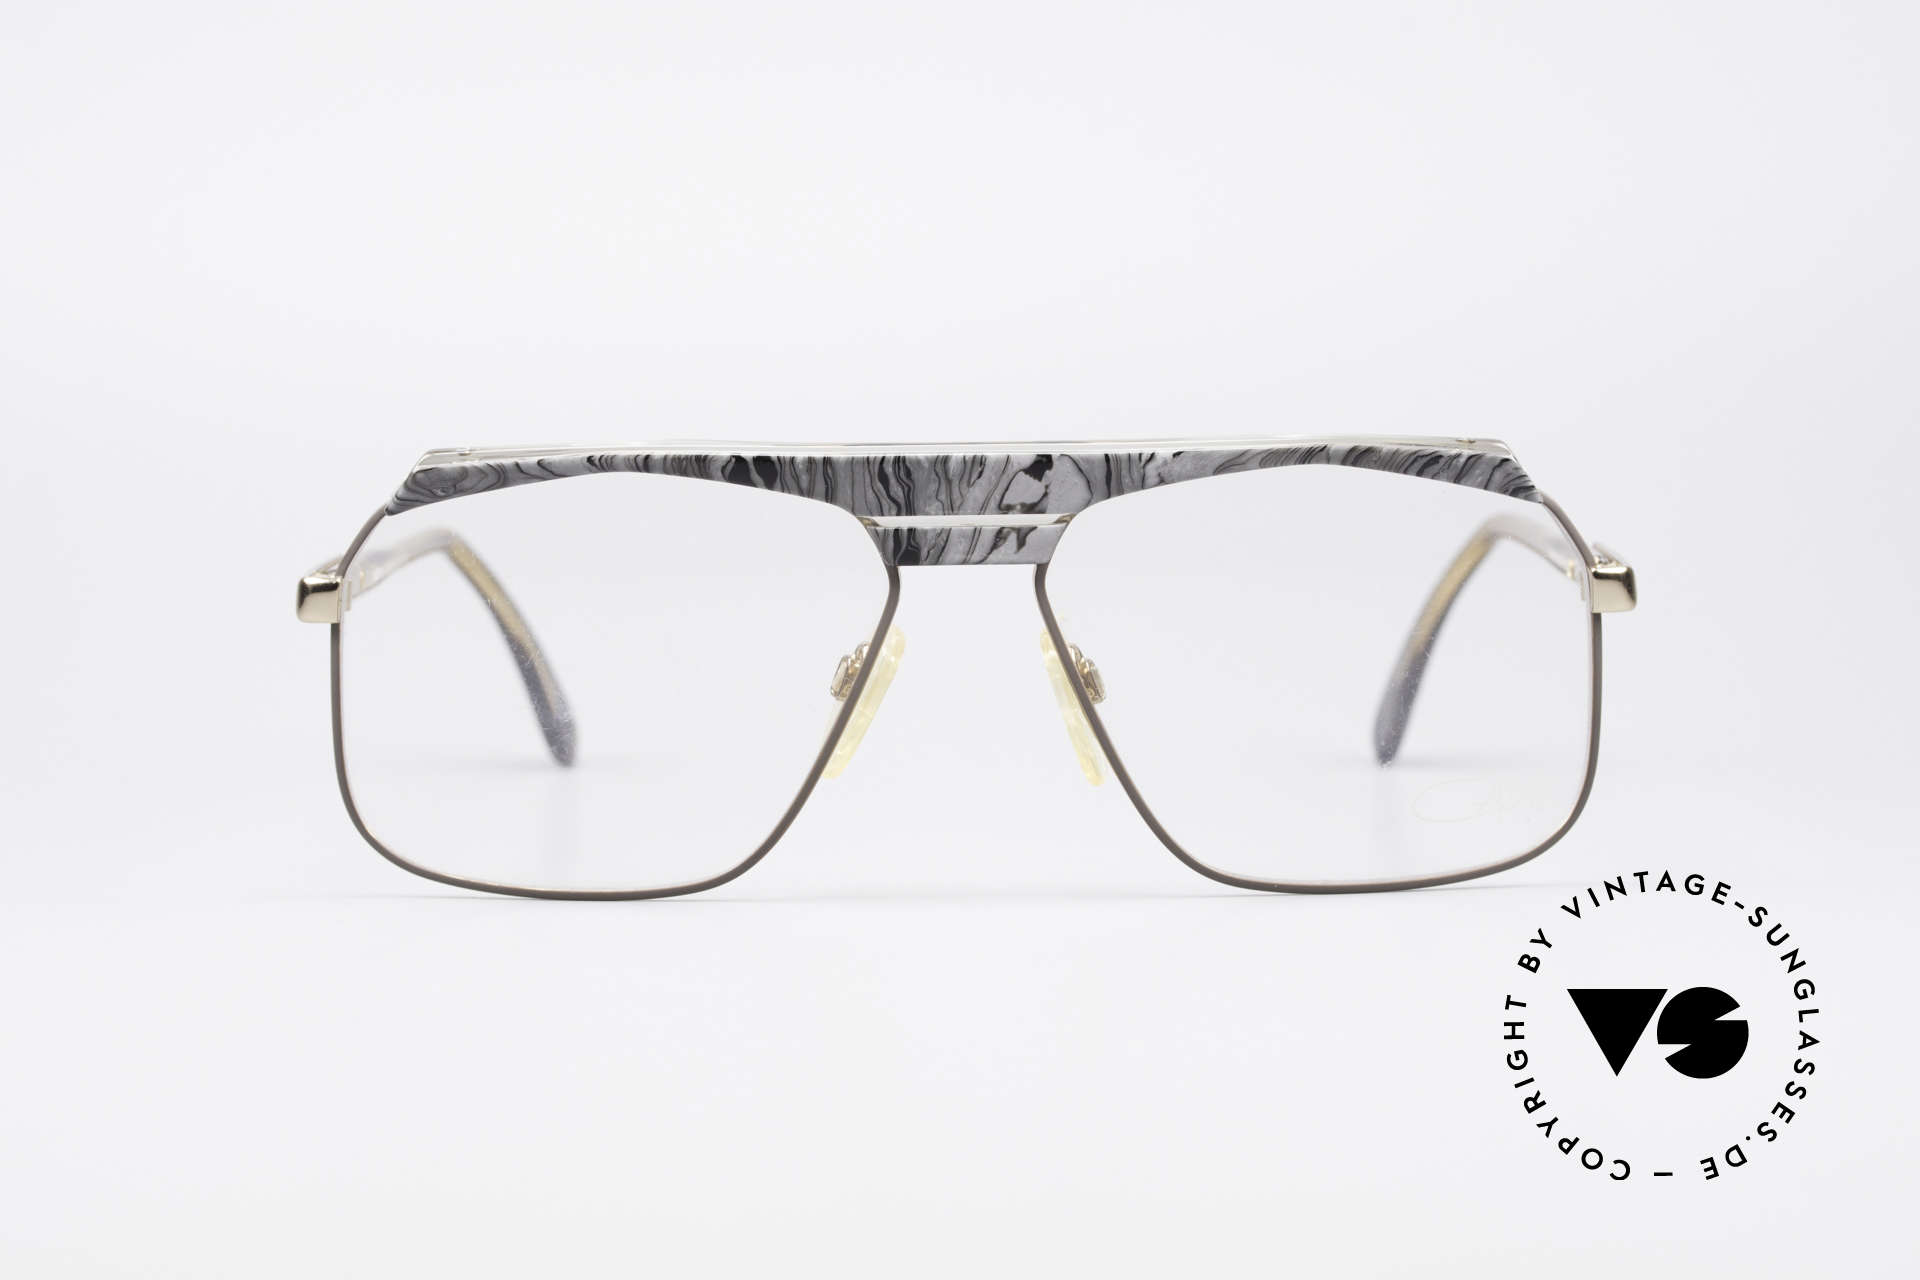 Cazal 730 80's West Germany Glasses, unique design by Cari Zalloni - just 'old school'!, Made for Men